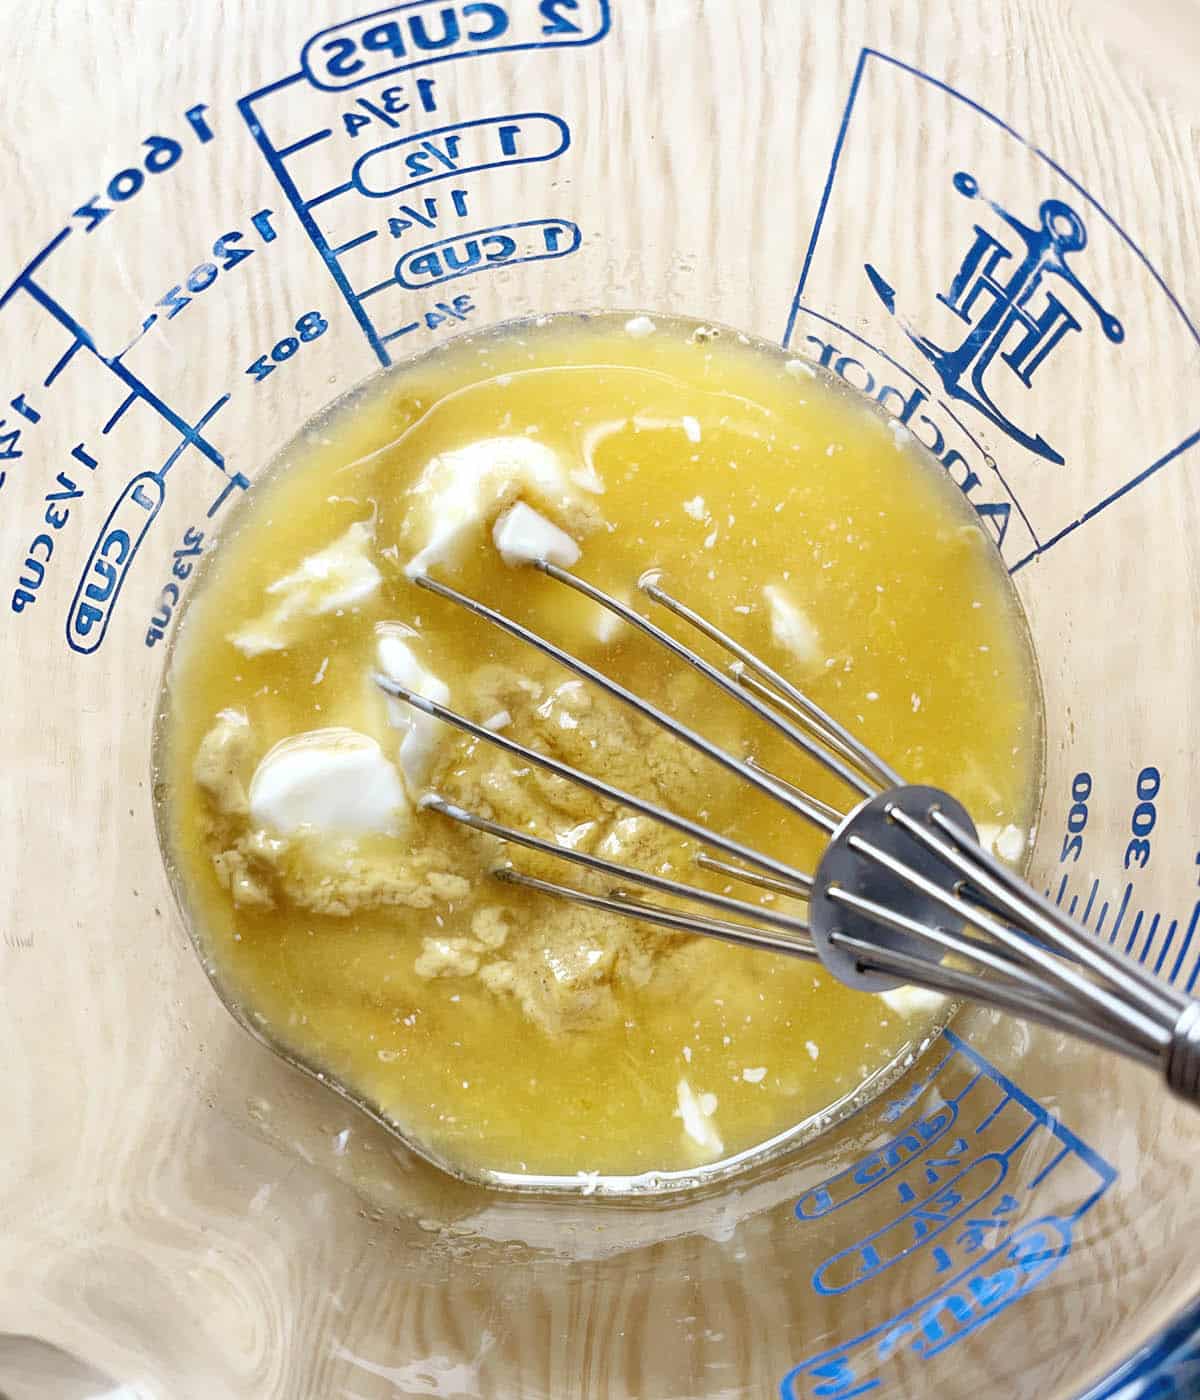 A glass measuring cup containing a metal whisk, orange juice, mayonnaise, and mustard.